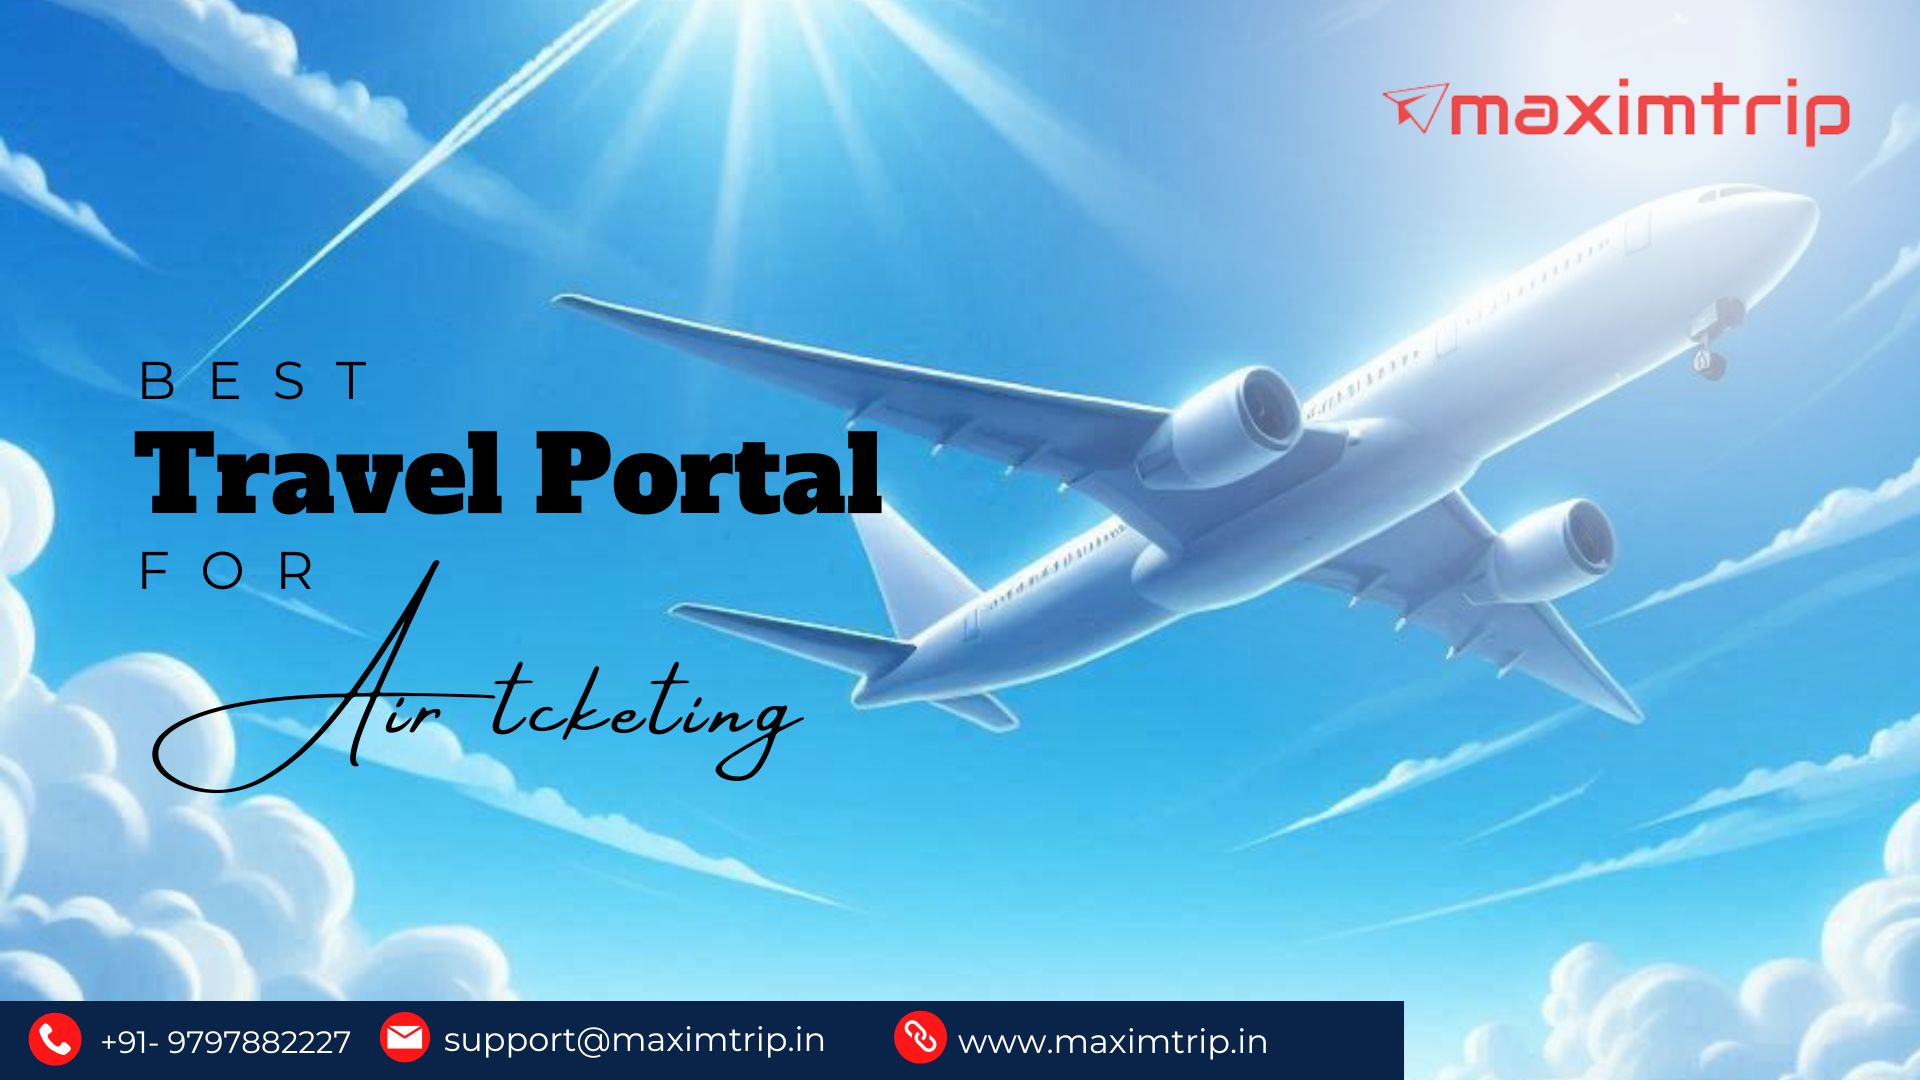 Best Travel Portal For Air Ticketing